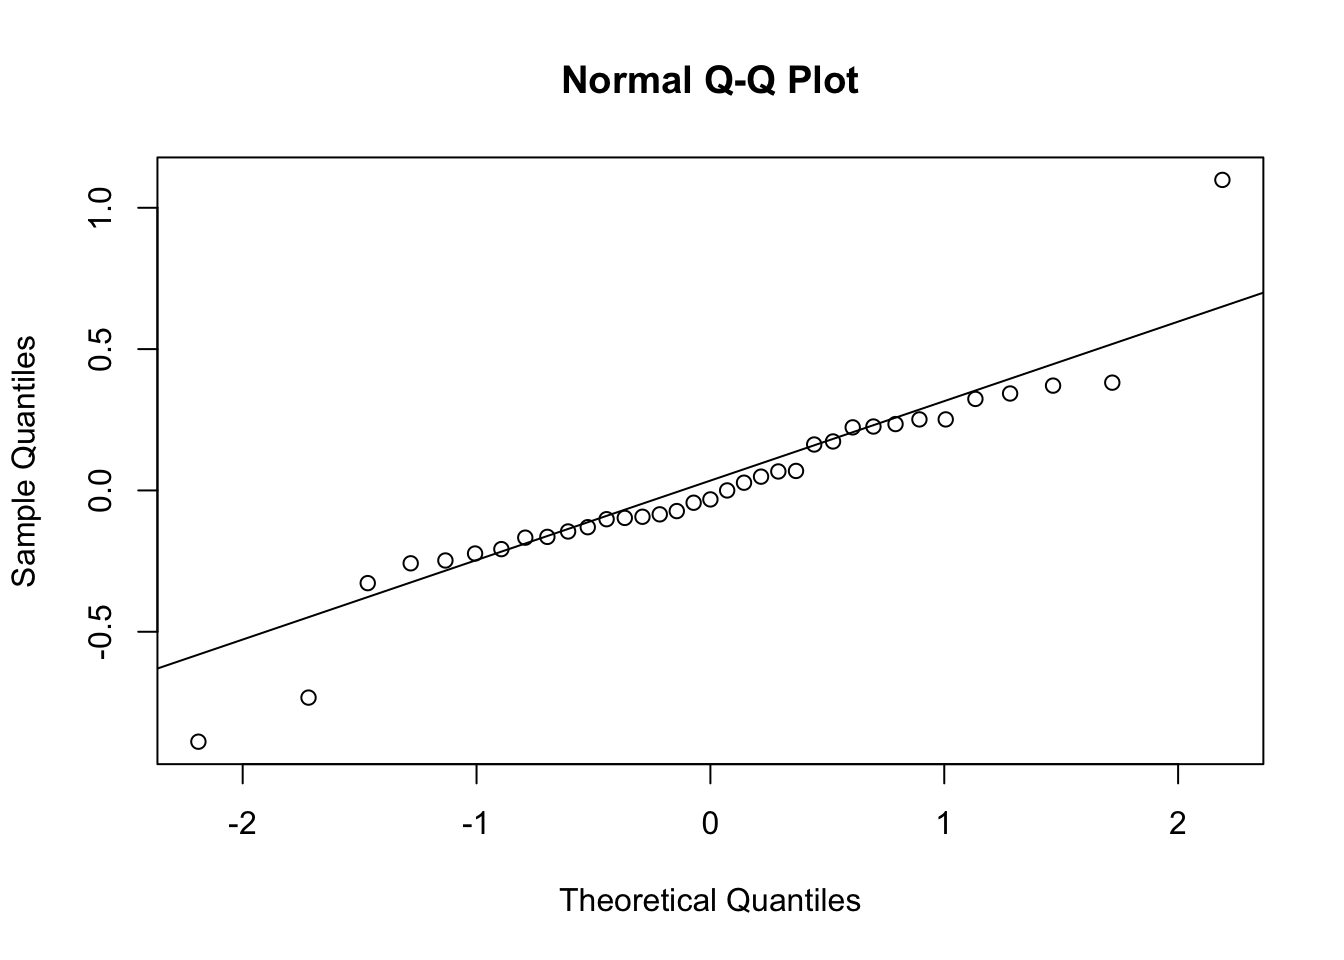 The logarithms of the observed R arrayed in a histogram (left) and a quantile-quantile plot comparing our log-growth rates to the normal distribution (right). Our data seem somewhat approximated by a Normal distribution whose mean and standard deviation are derived from the log-transformed data. The probability distribution has been rescaled to be visible on this graph. However, the q-q plot shows that the sample (y-axis) includes values that are smaller and larger than predicted by the normal distribution.